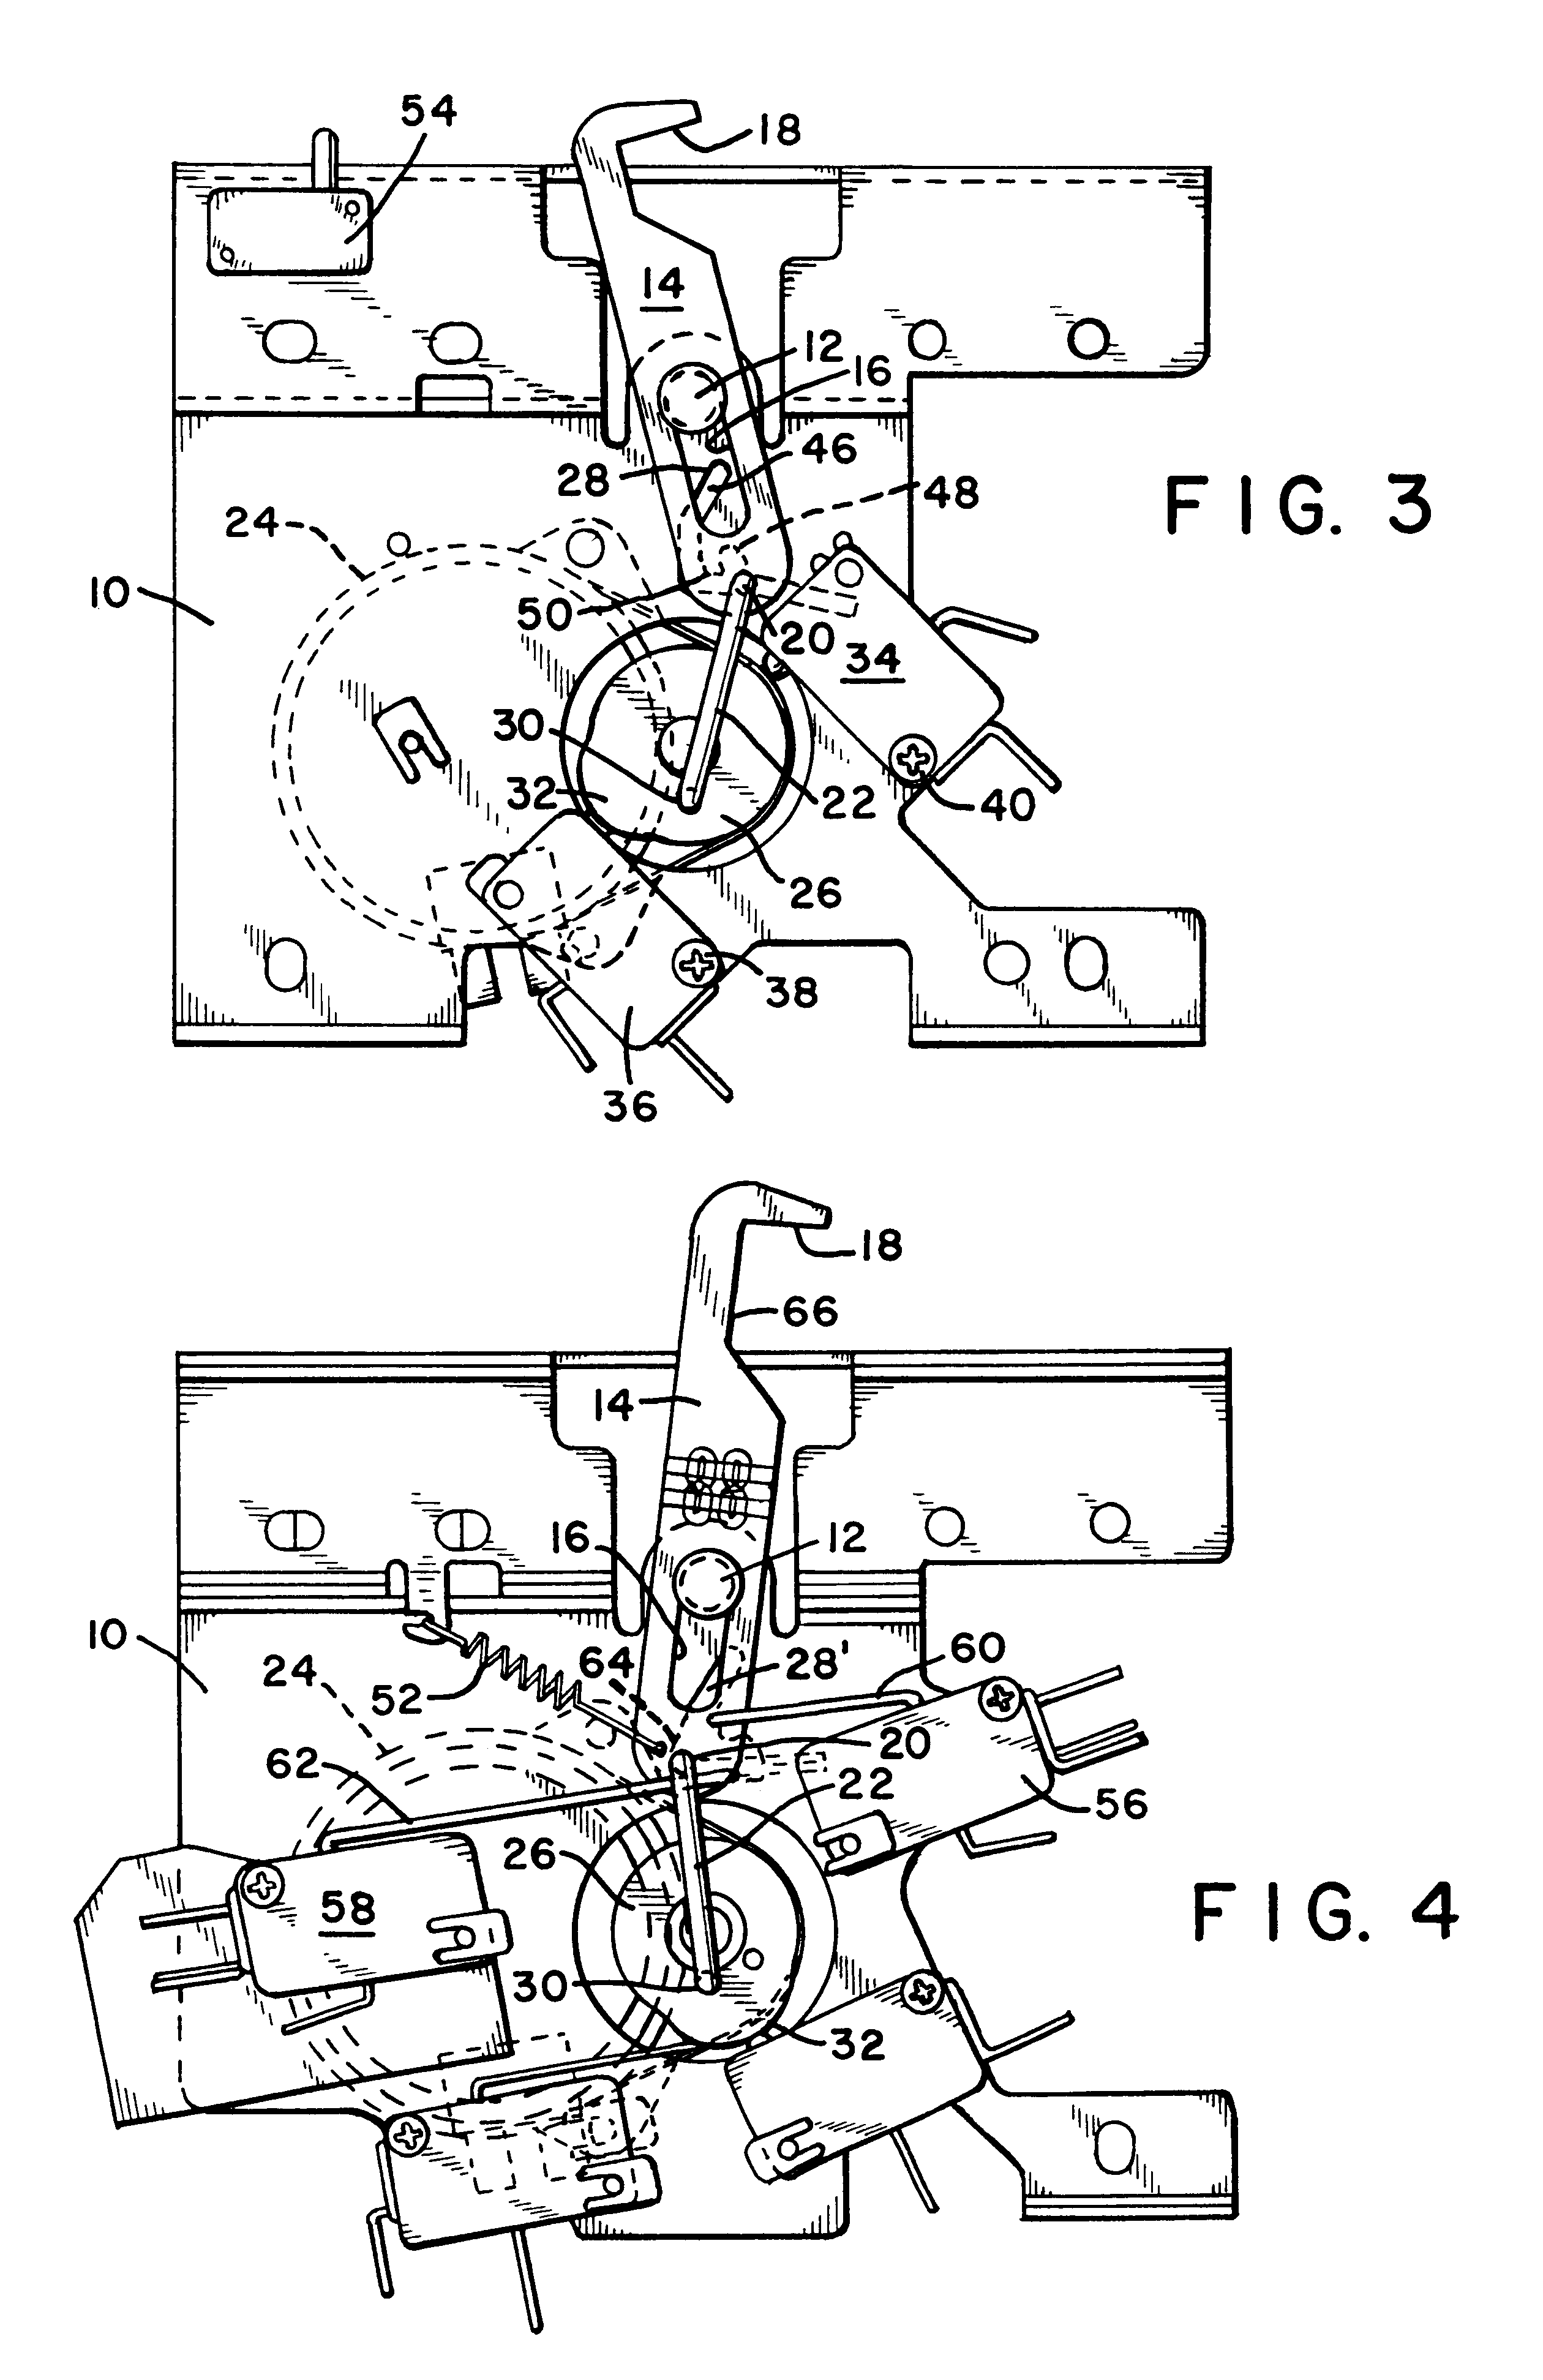 Motorized self-cleaning oven latch